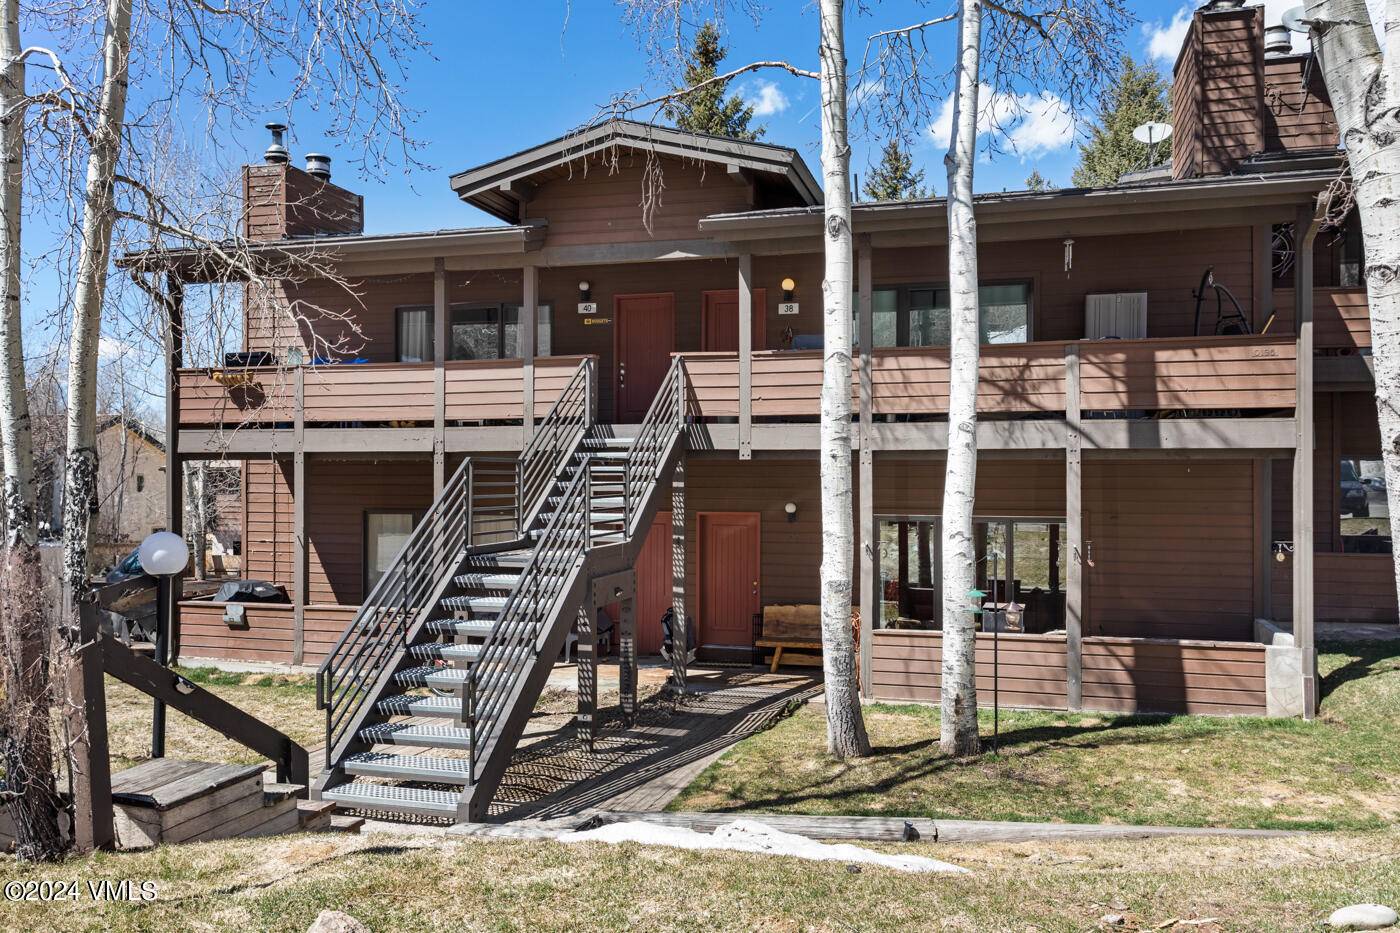 Introducing this beautiful 2 bedroom, 2 bathroom condominium in the sought after Eagle Vail neighborhood, just minutes from Vail Village and Beaver Creek Mountain.